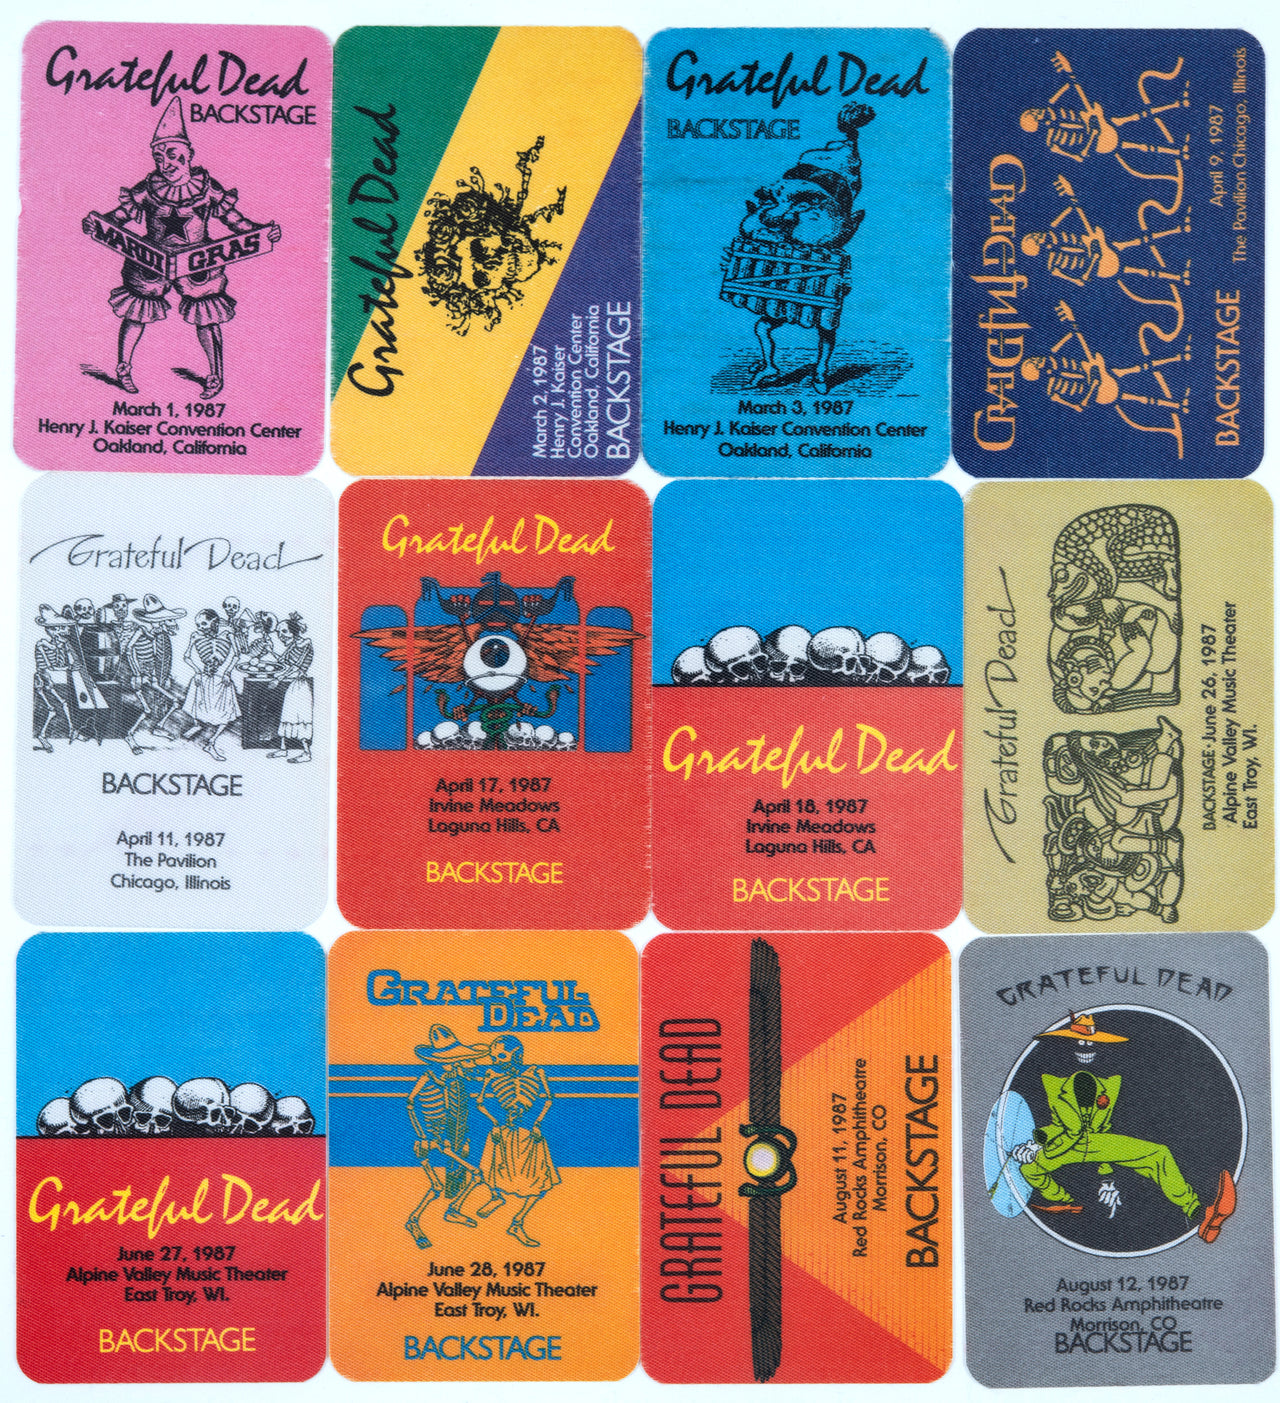 Grateful Dead Backstage Passes (3/1/1987 - 8/12/1987) from Dan Healy